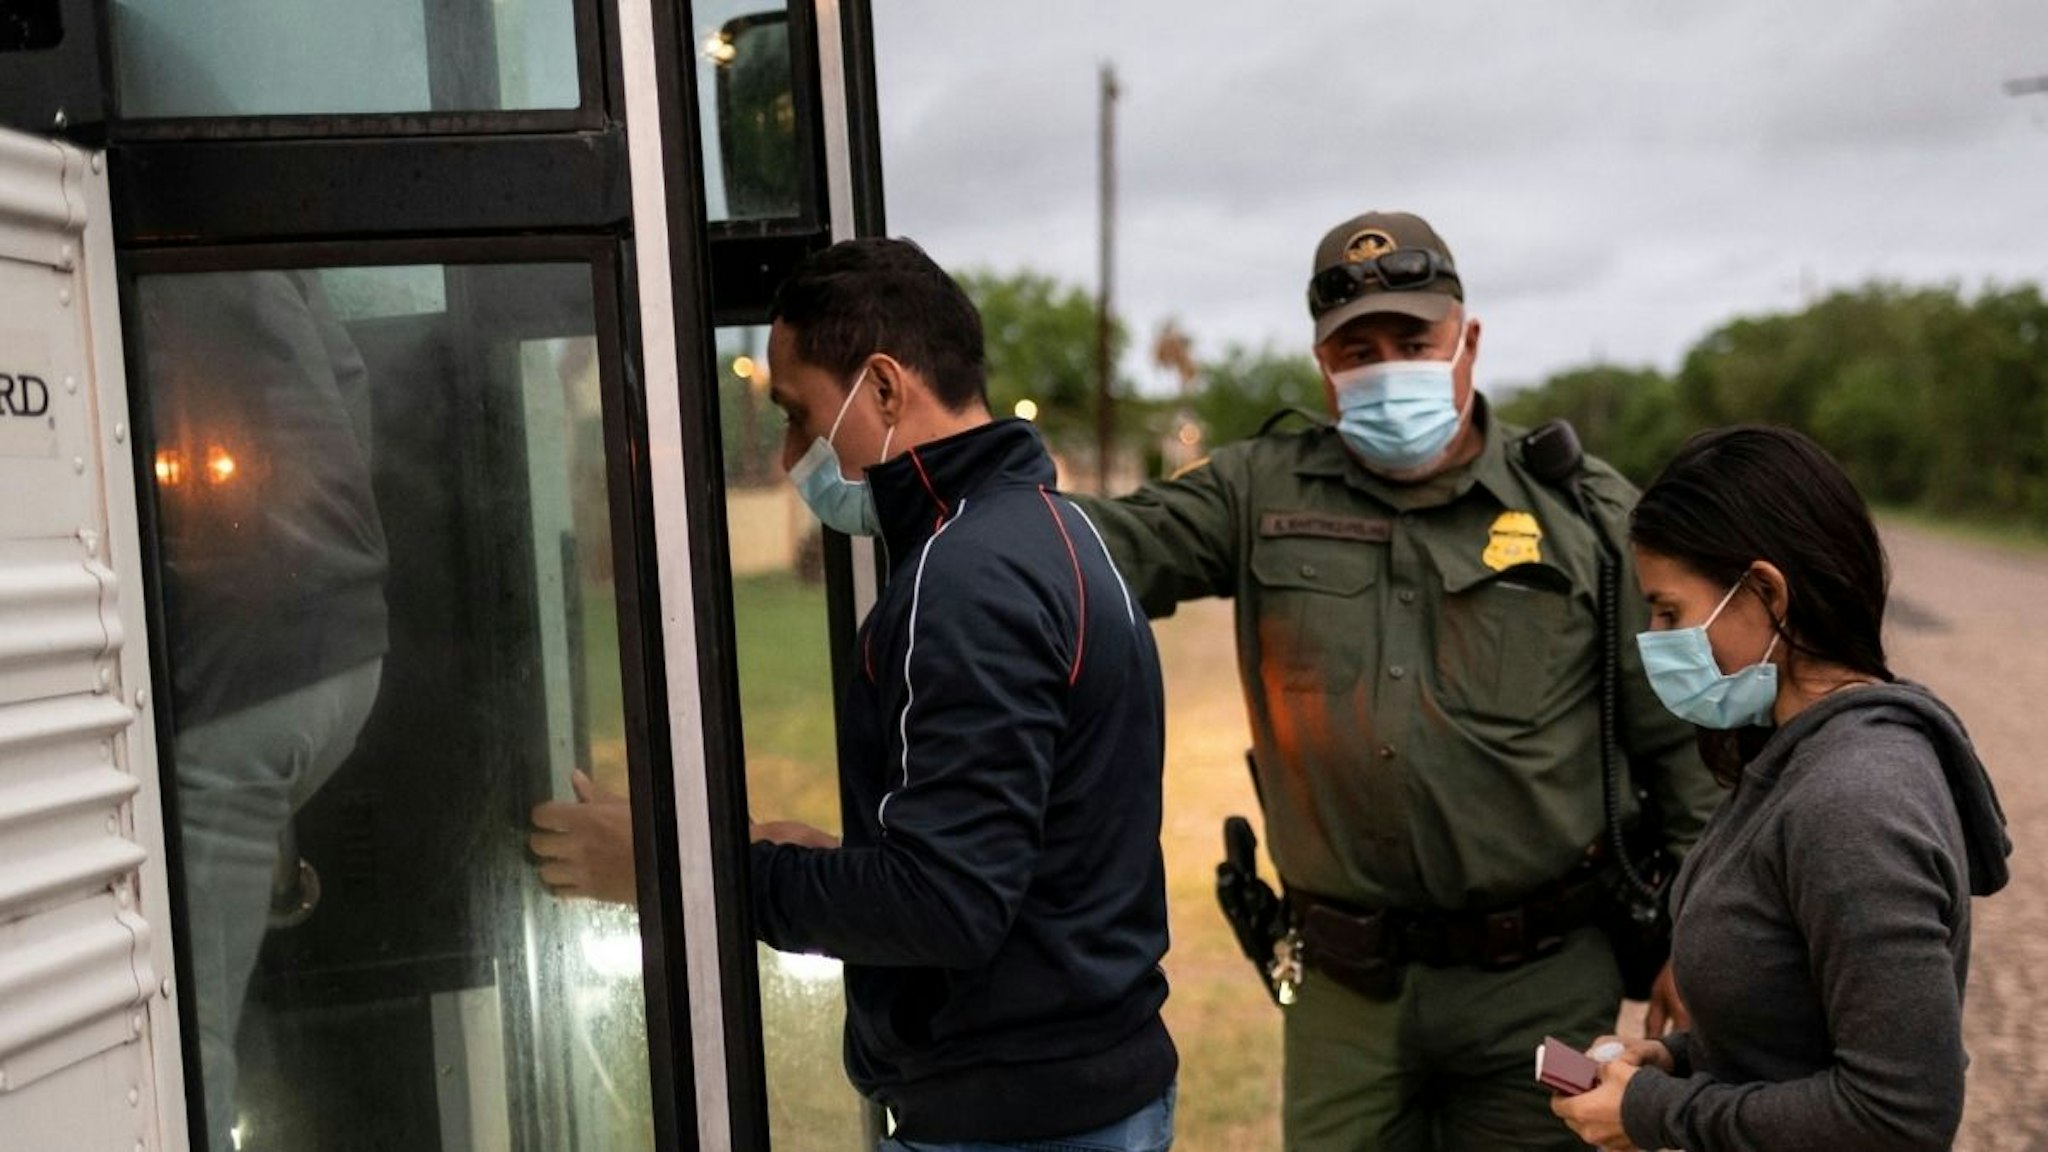 Migrants make their onto a bus after being apprehended near the border between Mexico and the United States in Del Rio, Texas on May 16, 2021.